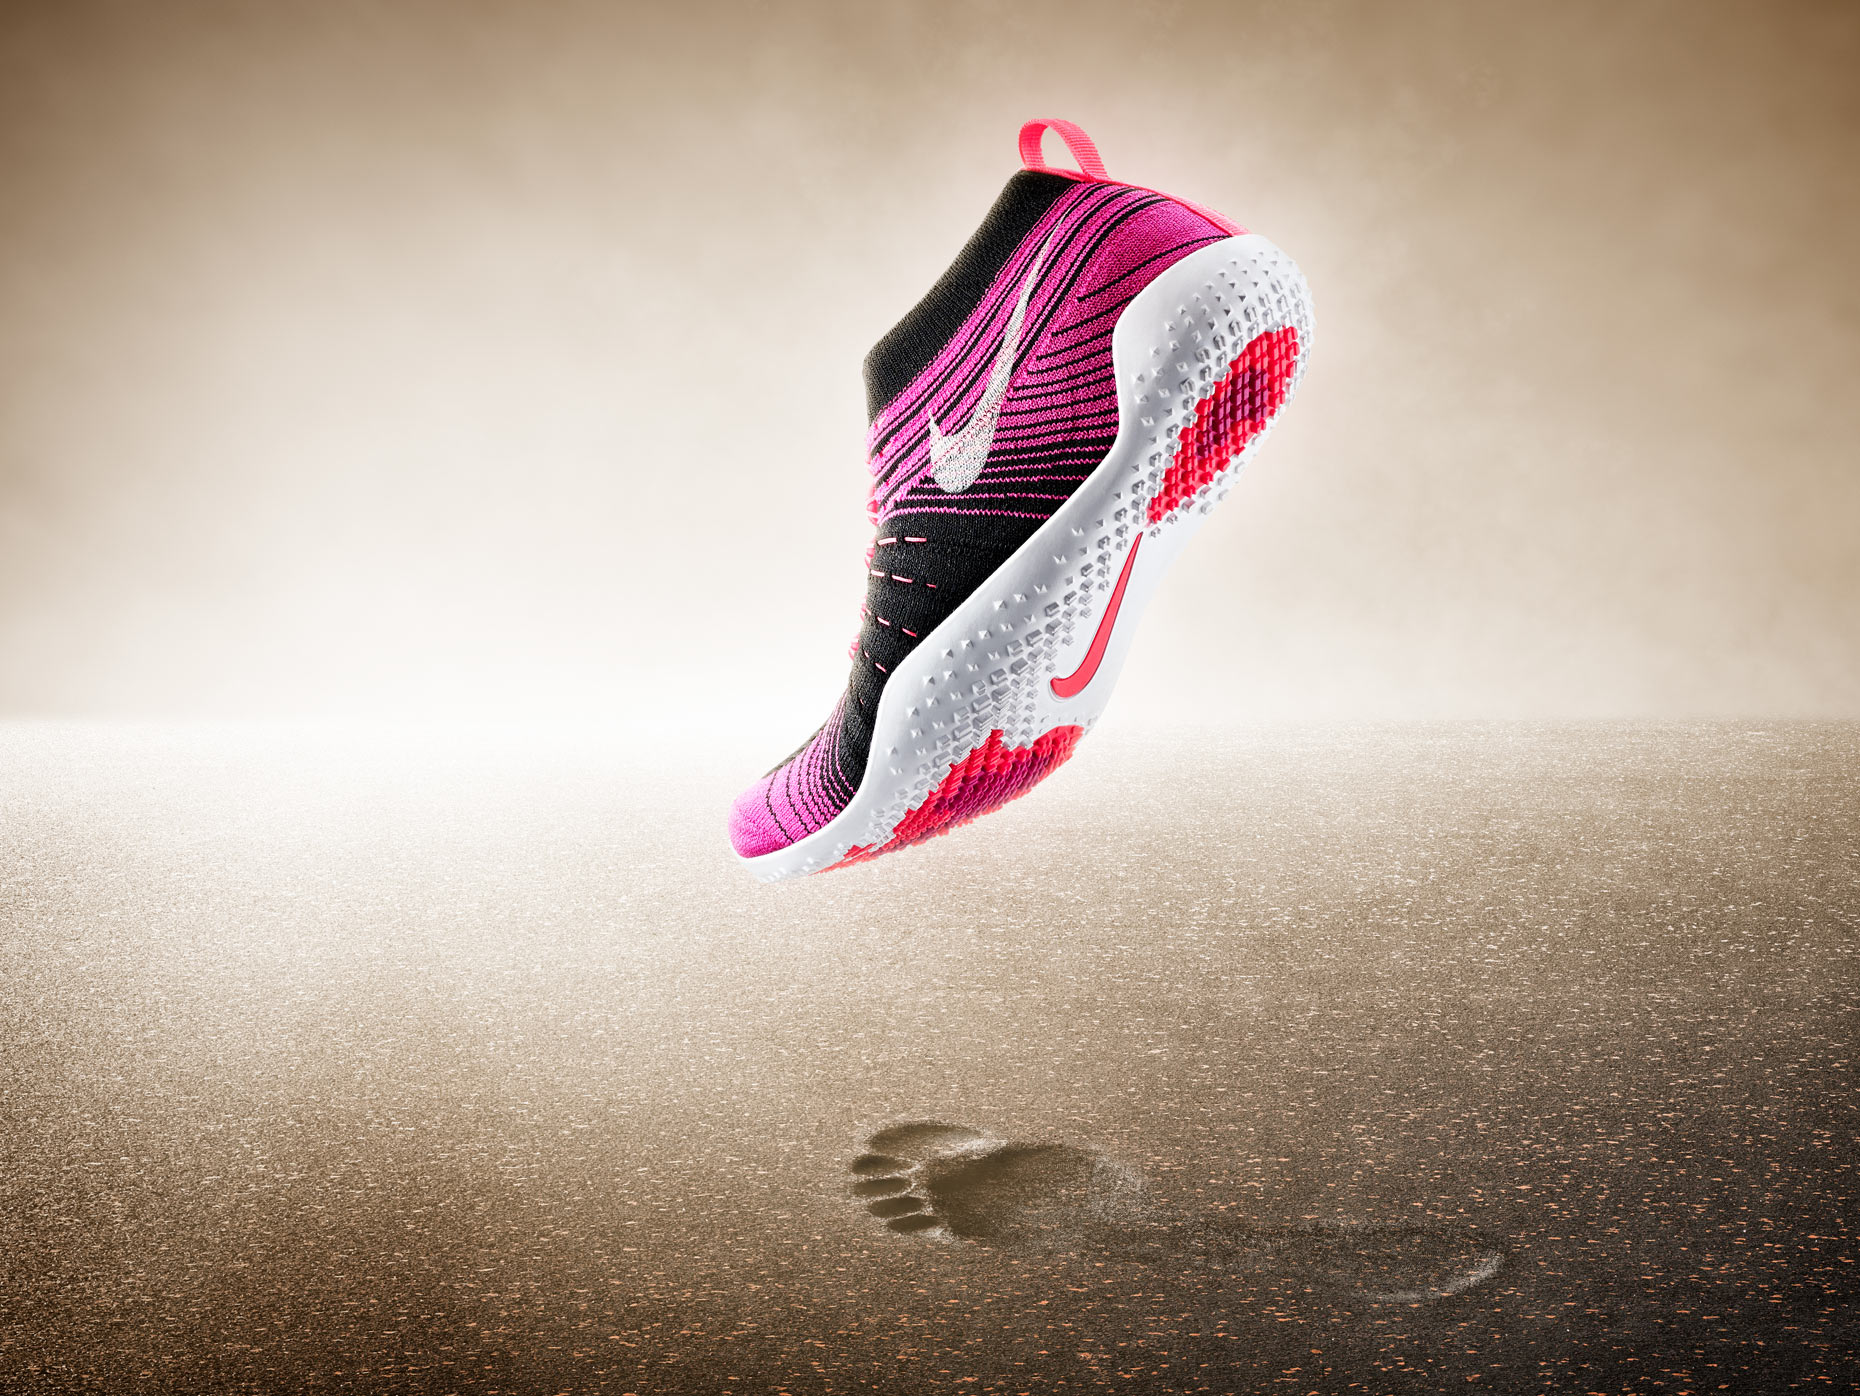 Nike Hyperfeel Image Composite, Effects and Retouching